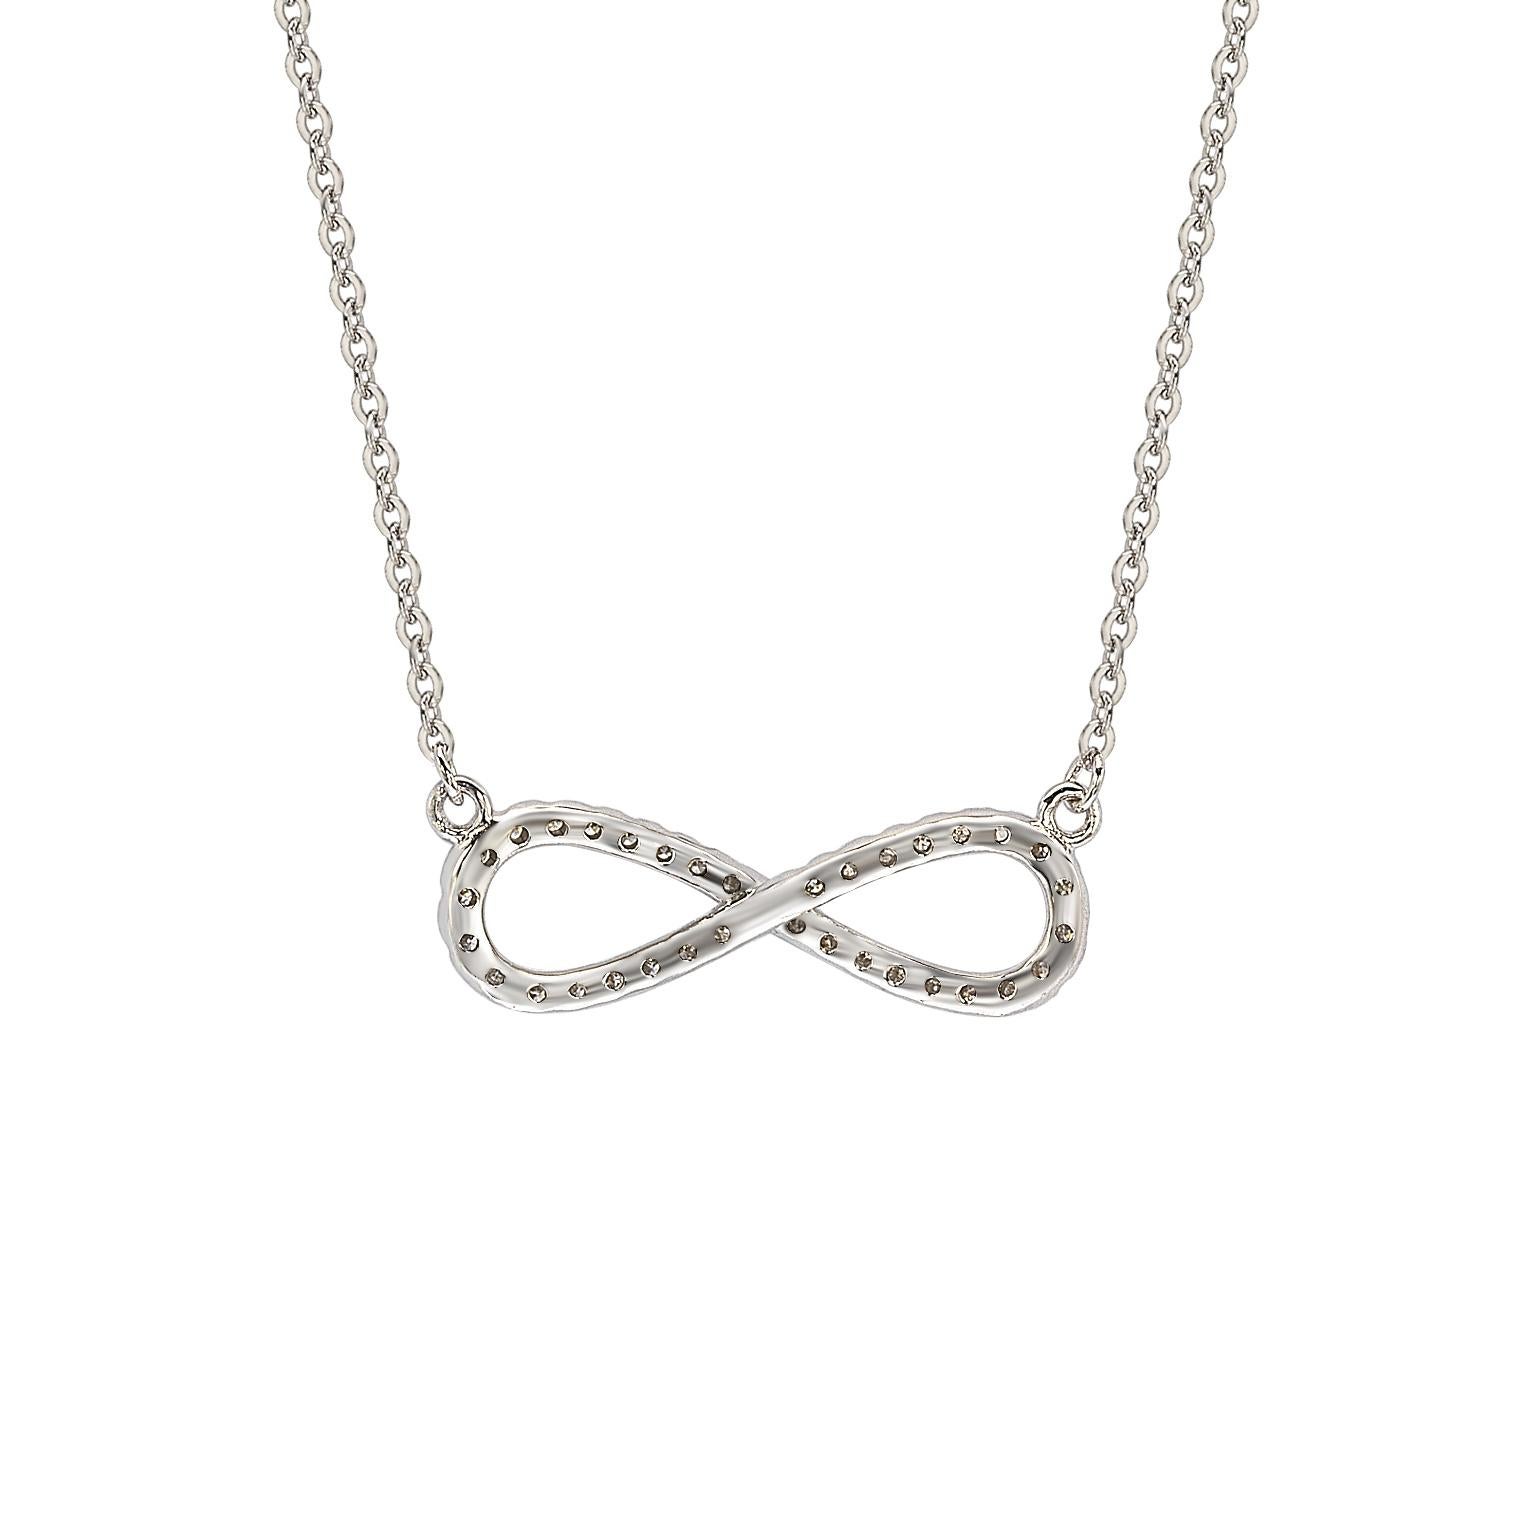 This elegant Suzy Levian solitaire infinity necklace displays round-cut diamonds on 14 karat white gold setting. This gorgeous infinity pendant has 39, 1 mm white round cut diamonds totaling .20 cttw. This infinity necklace can be perfect to wear